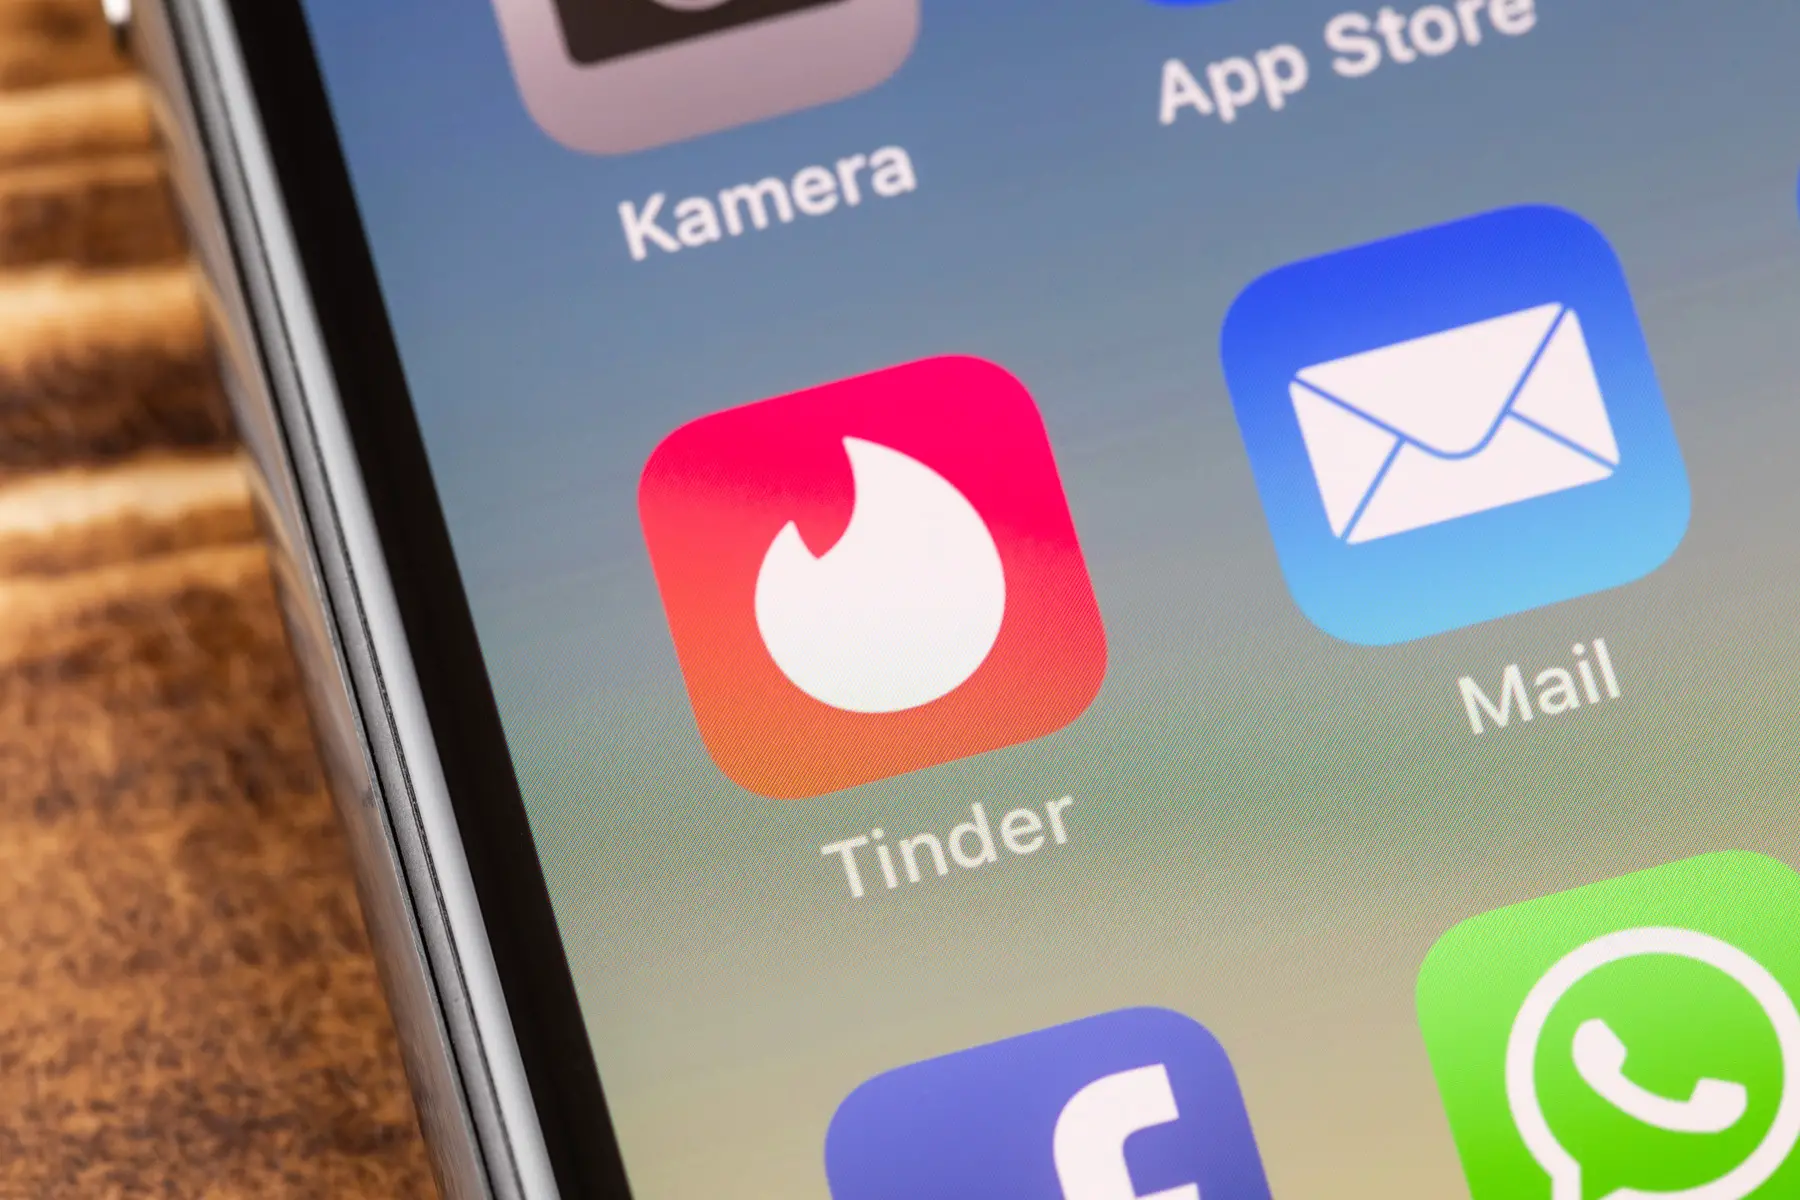 Tinder app icon on a German mobile phone